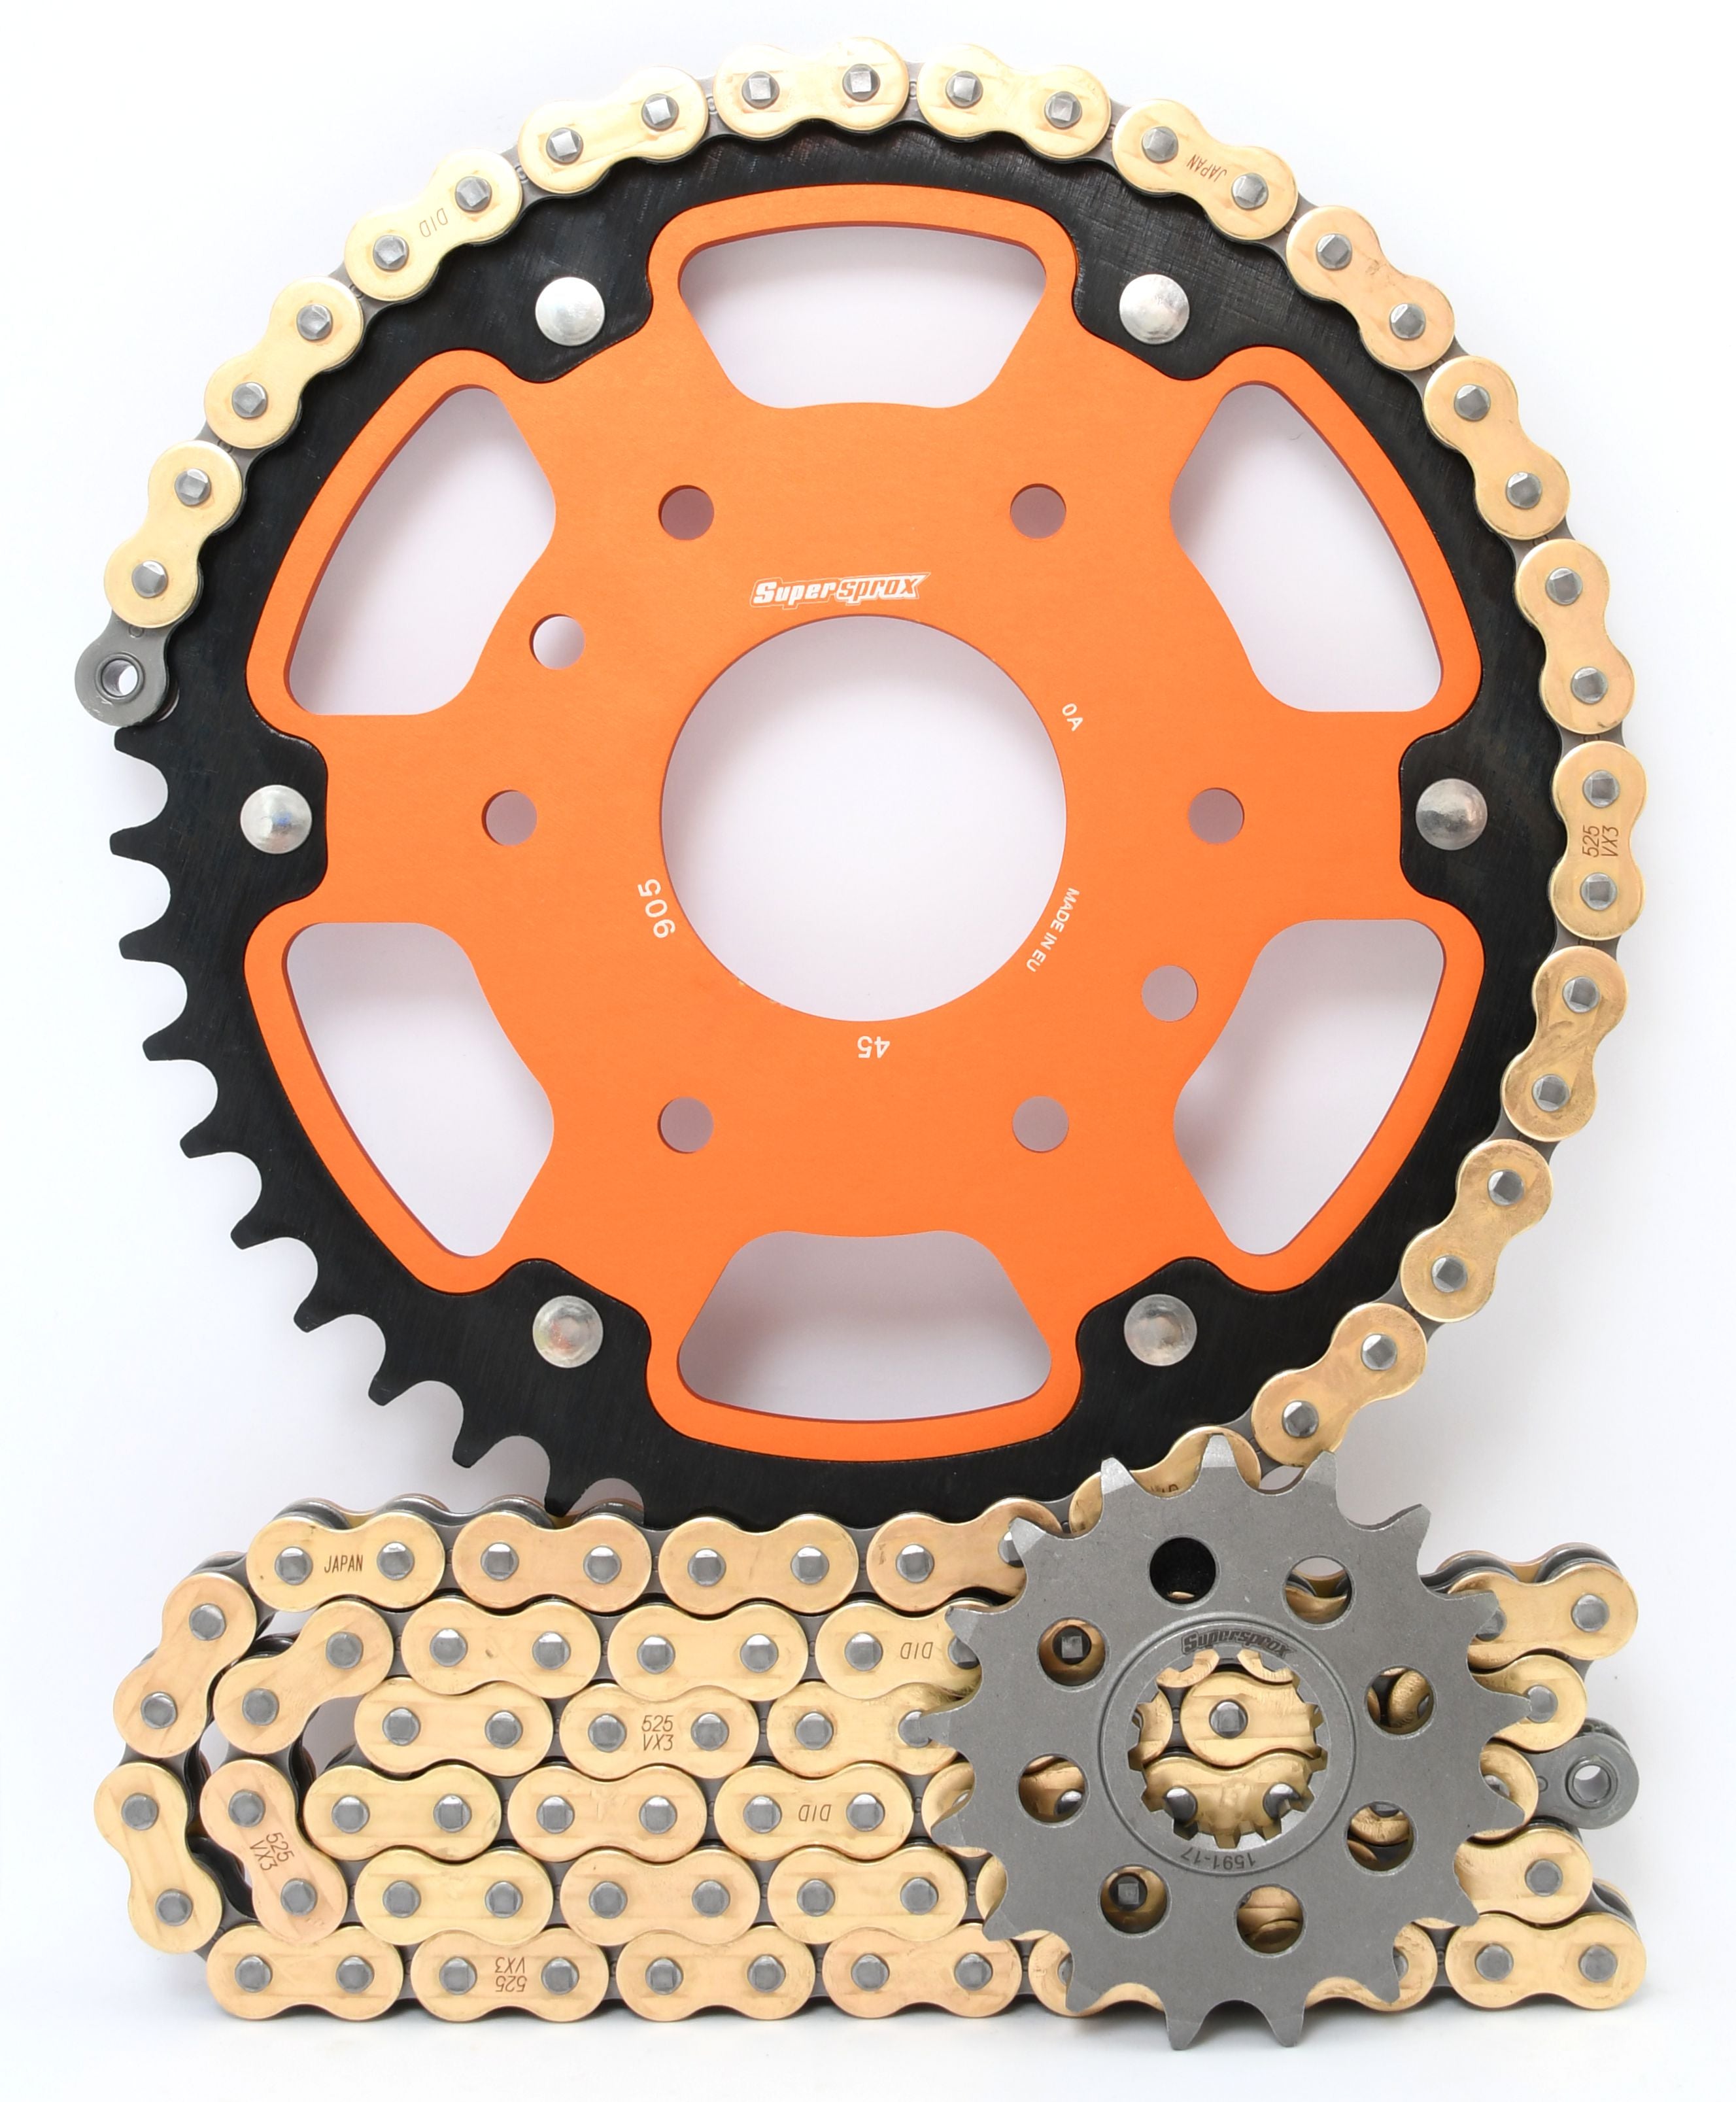 Supersprox Chain & Sprocket Kit for KTM 390 RC and Duke - Standard Gearing